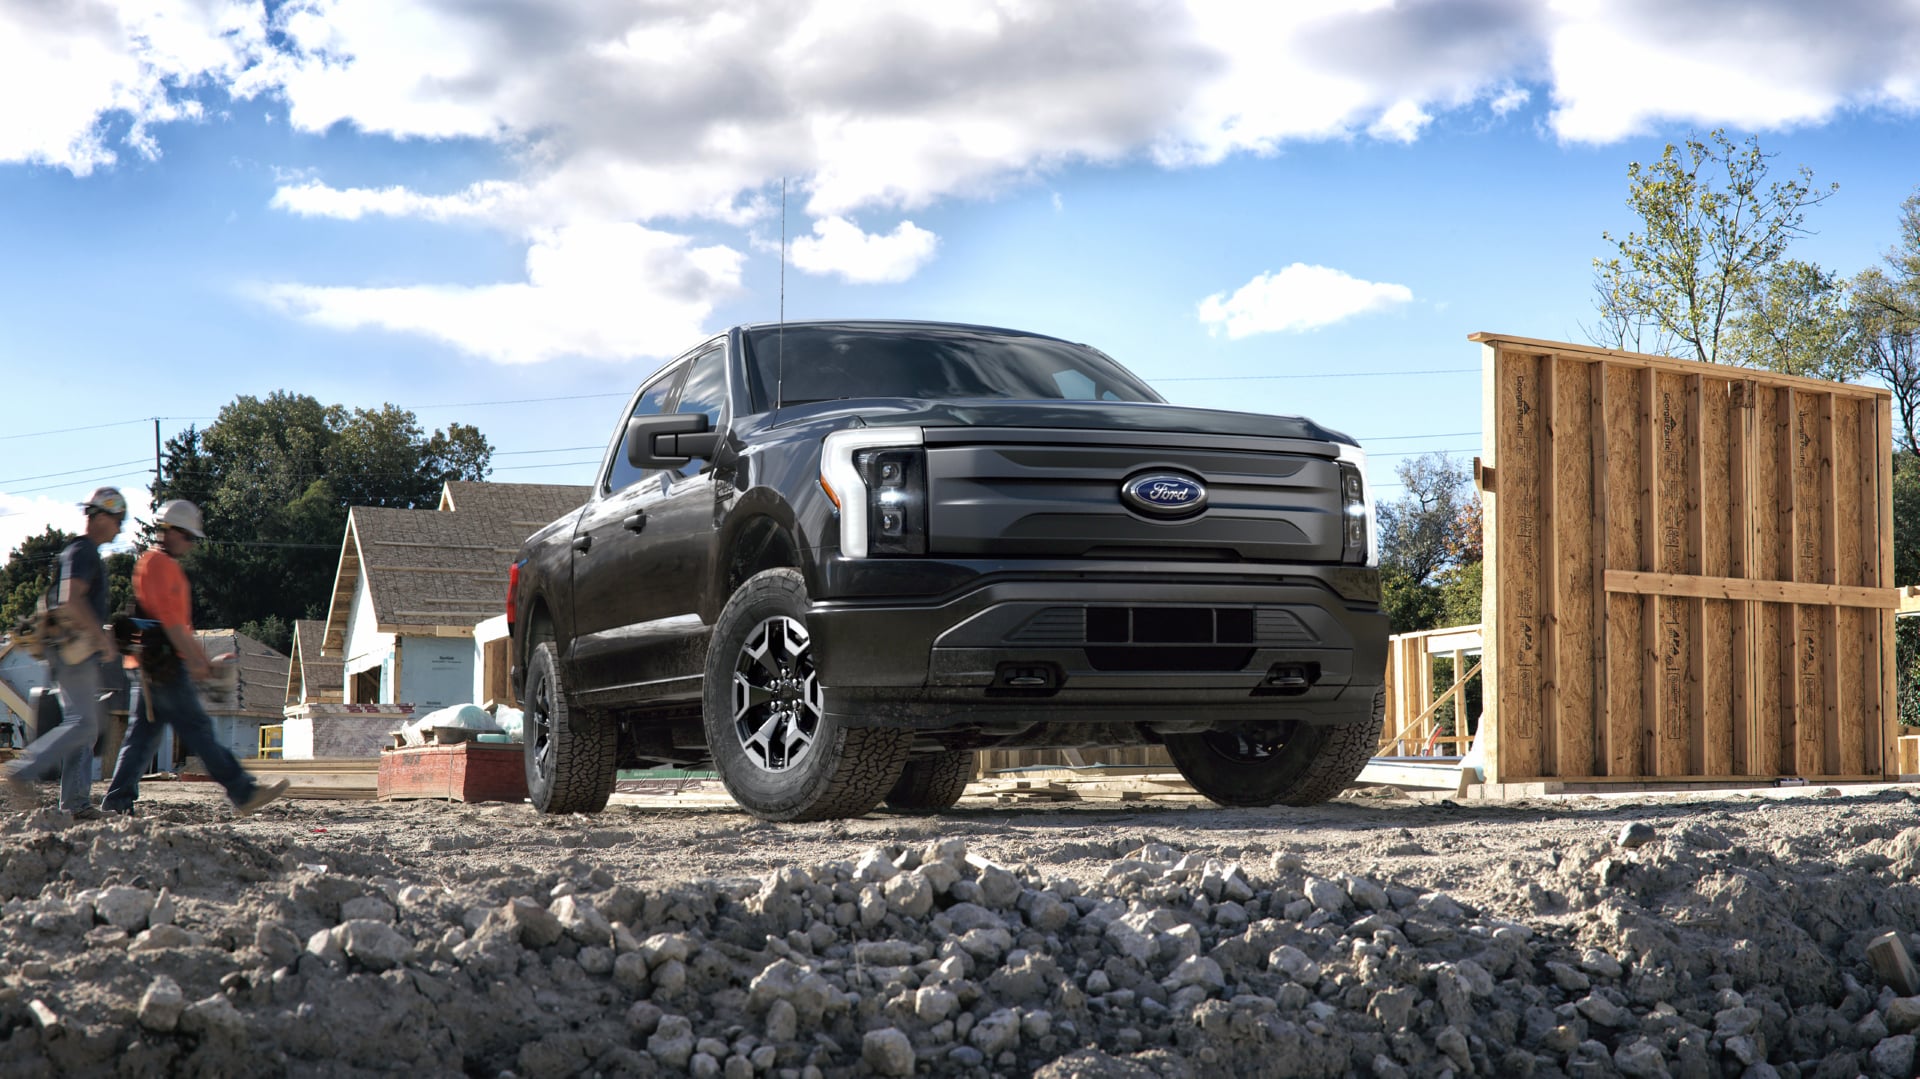 Ford F-150 Lightning Pro wallpapers HD quality